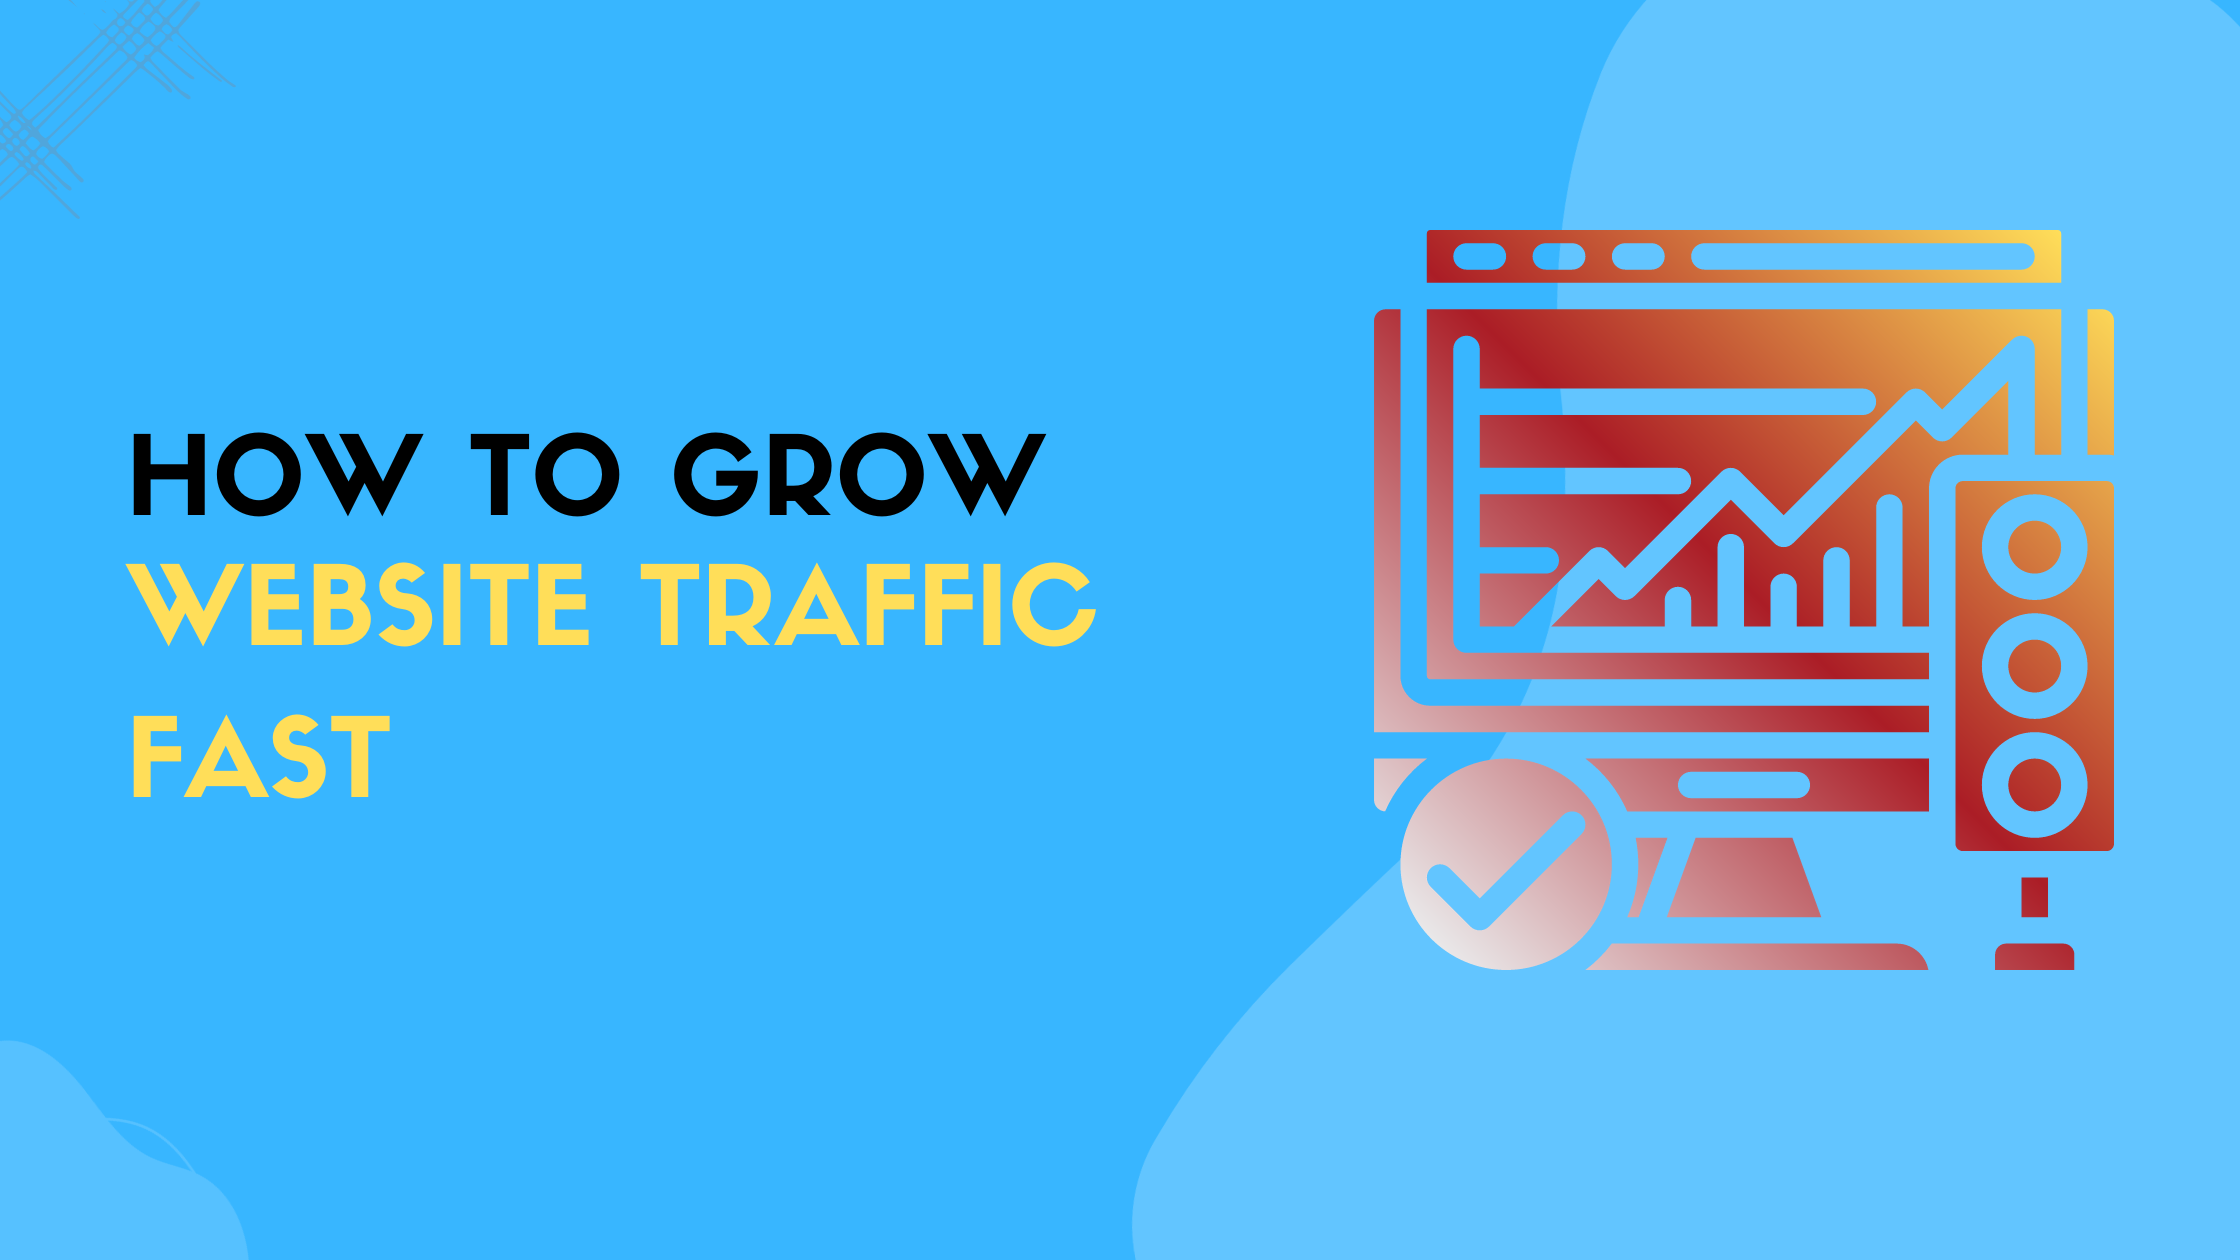 How to grow website traffic fast